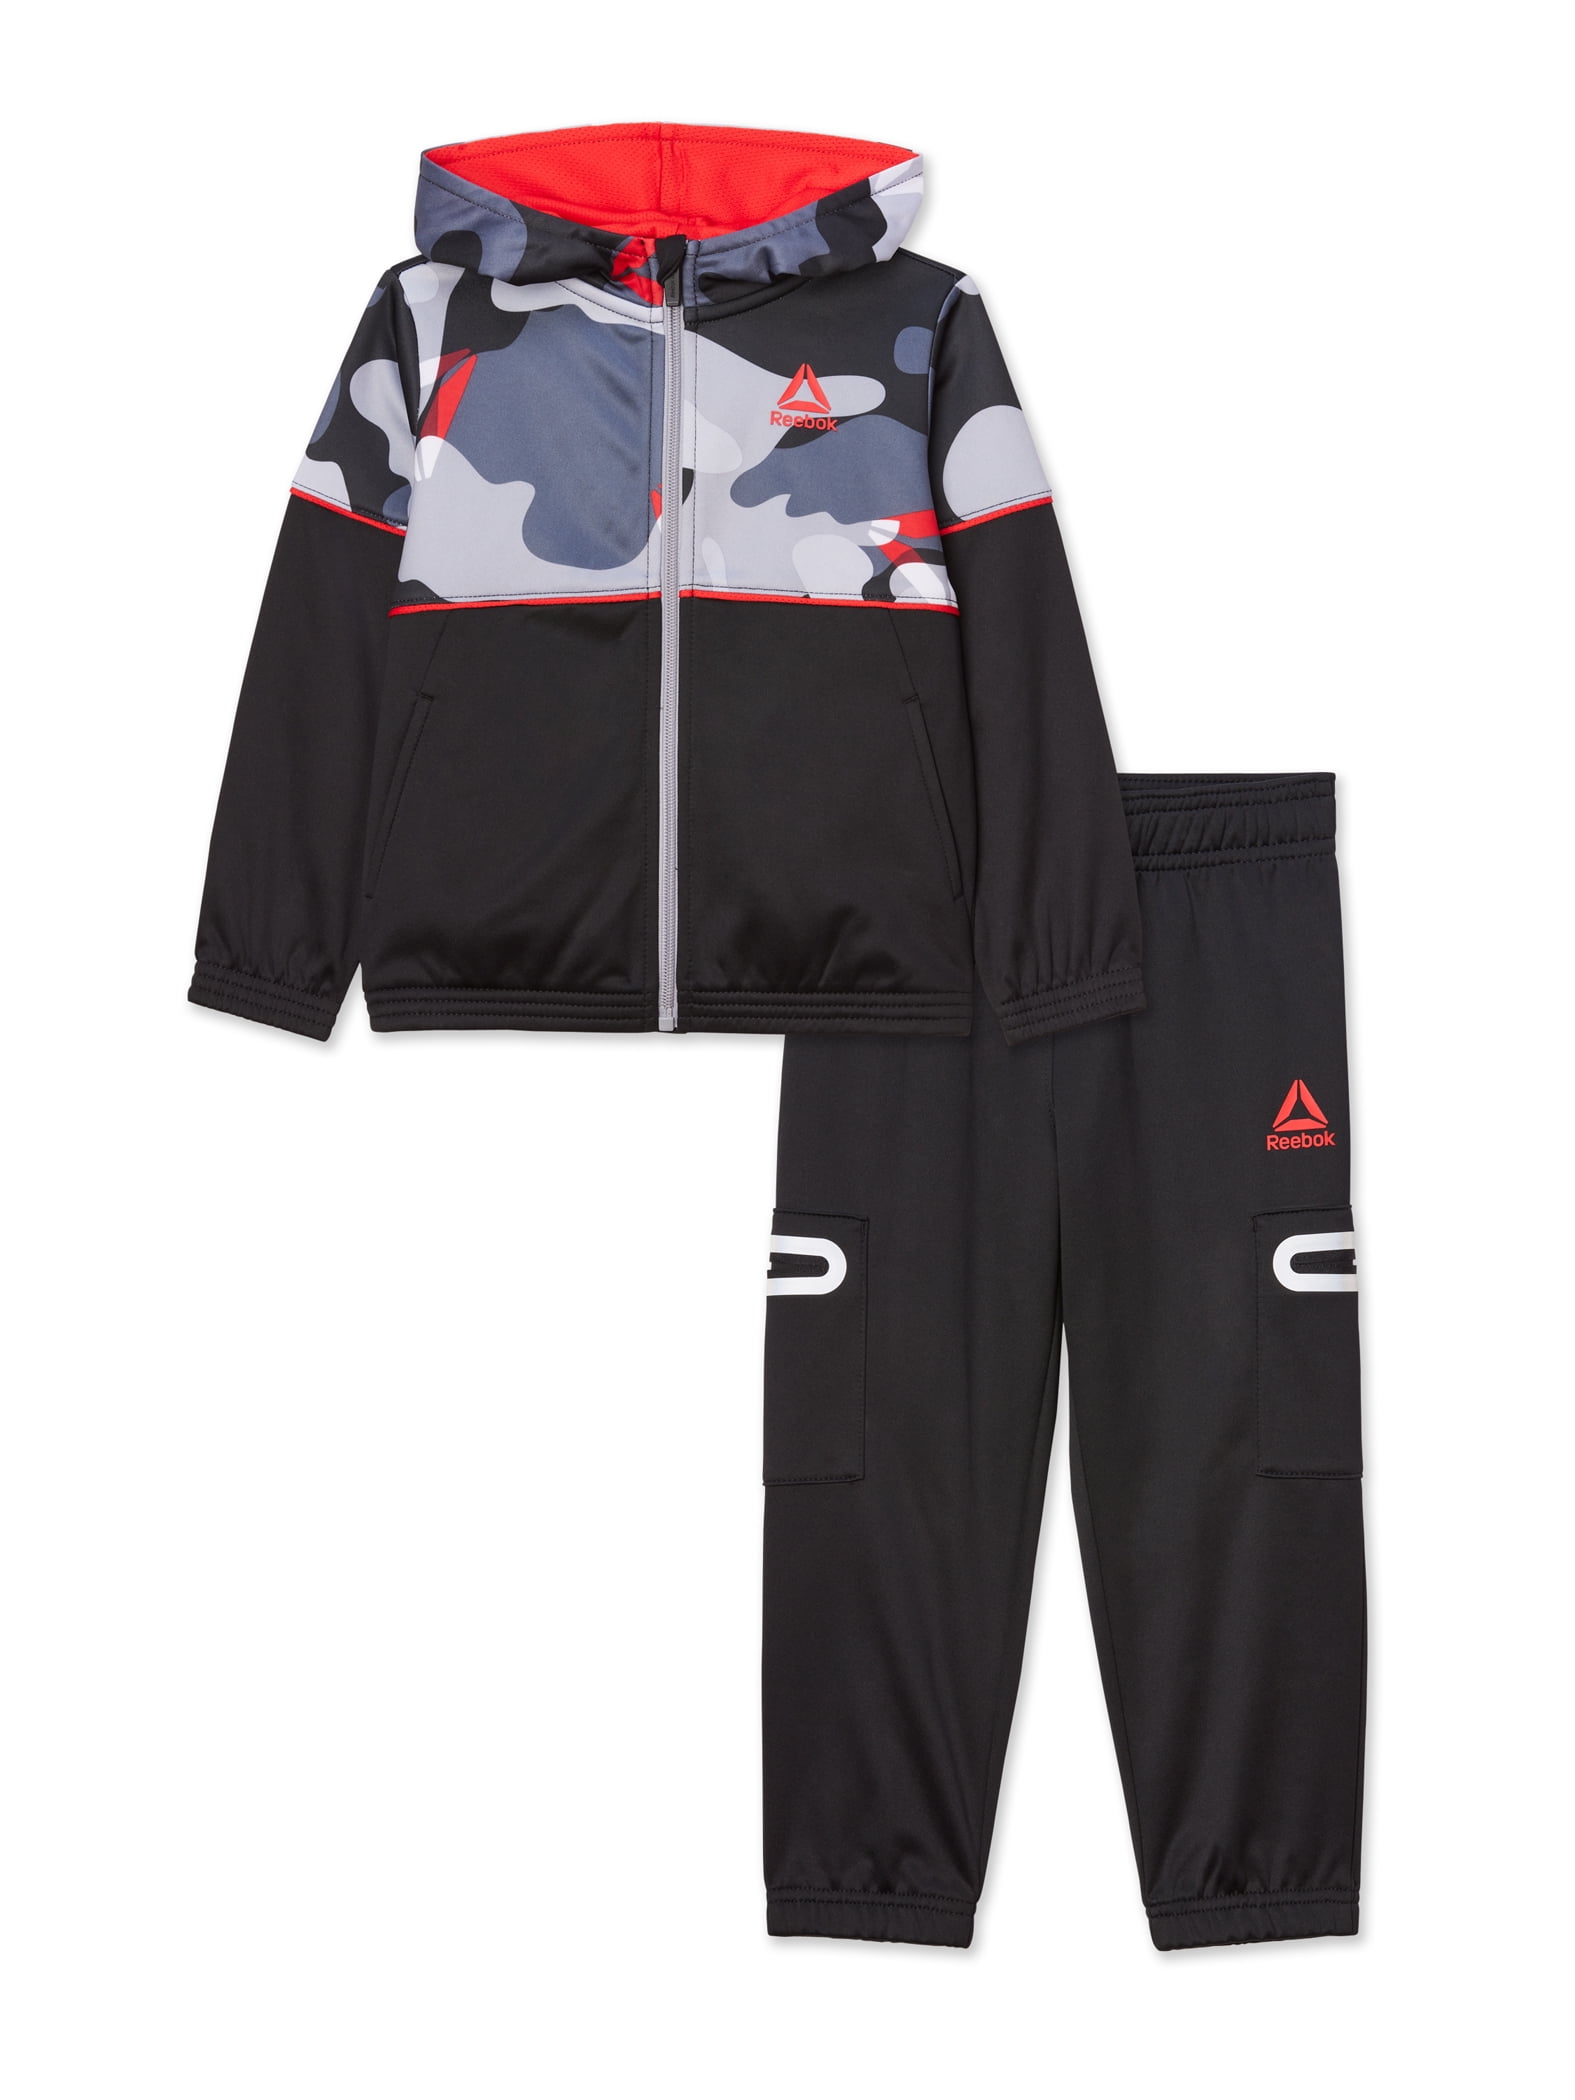 Reebok Baby and Toddler Boy Guard Printed Zip Hoodie and Jogger Pants Outfit Set, 2-Piece, Sizes 12M-5T